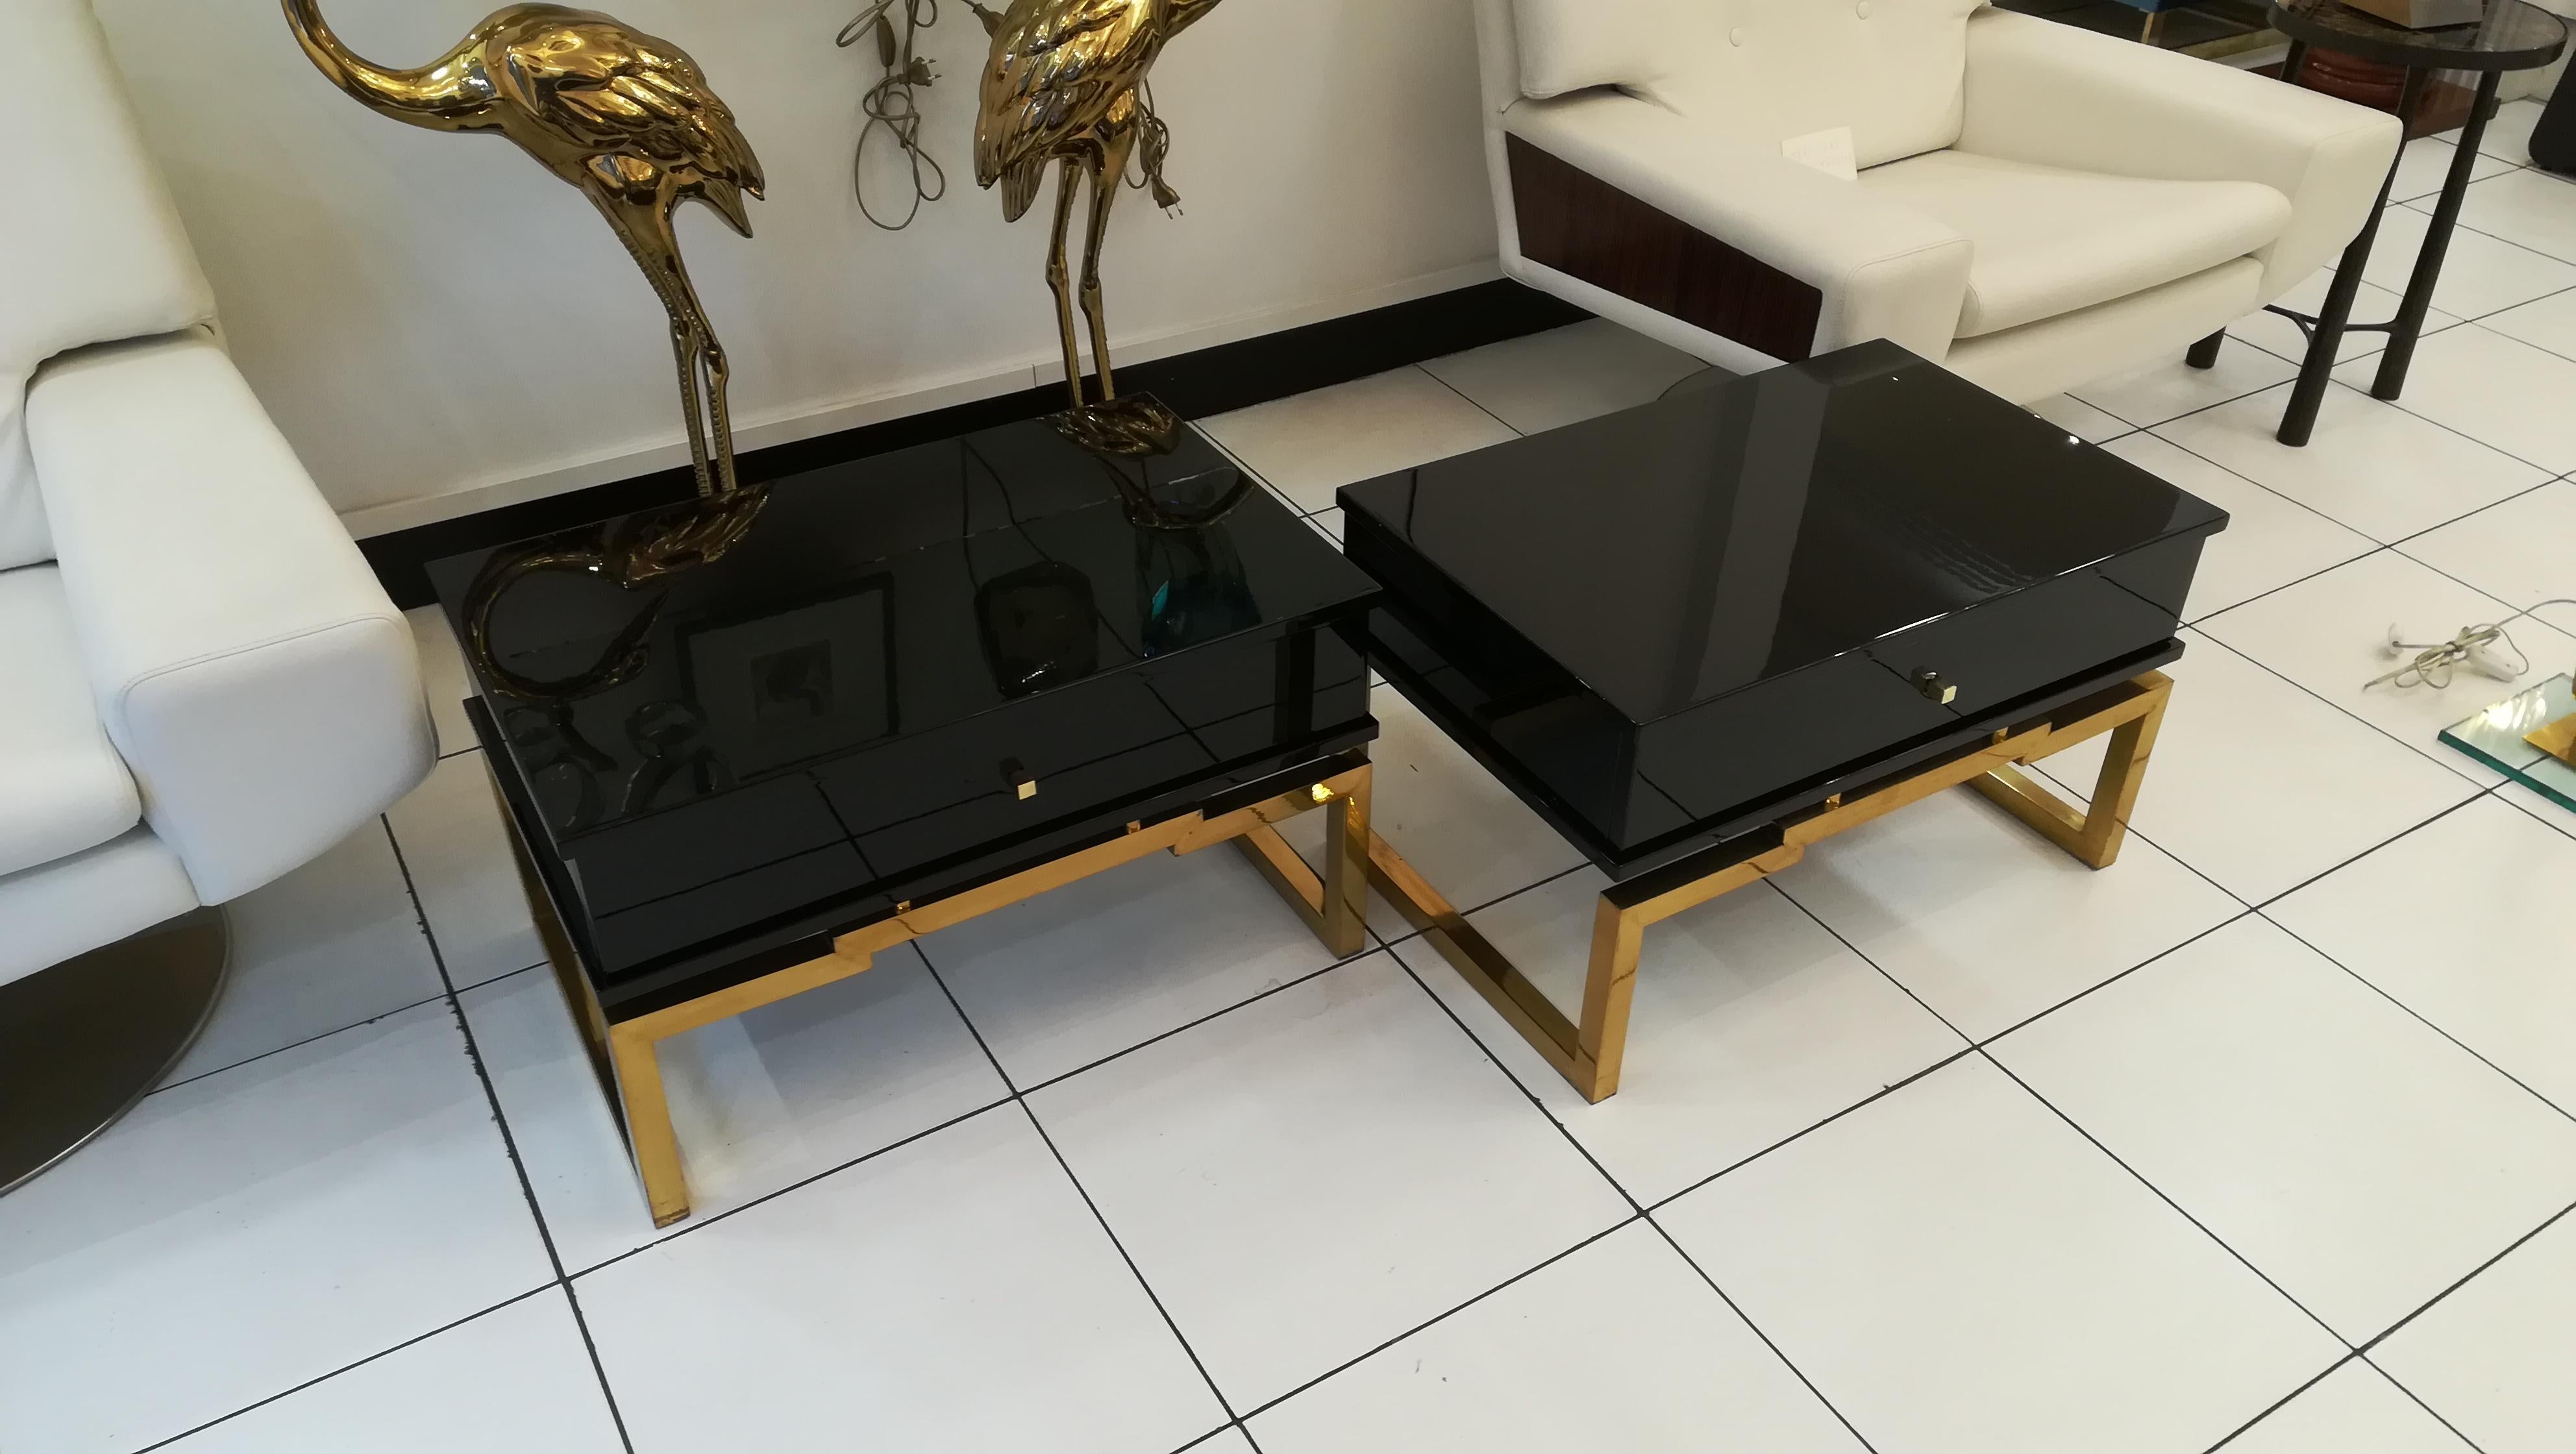 Pair of bedsides or end tables in lacquered wood, brass feet, circa 1970, by Mario Sabot